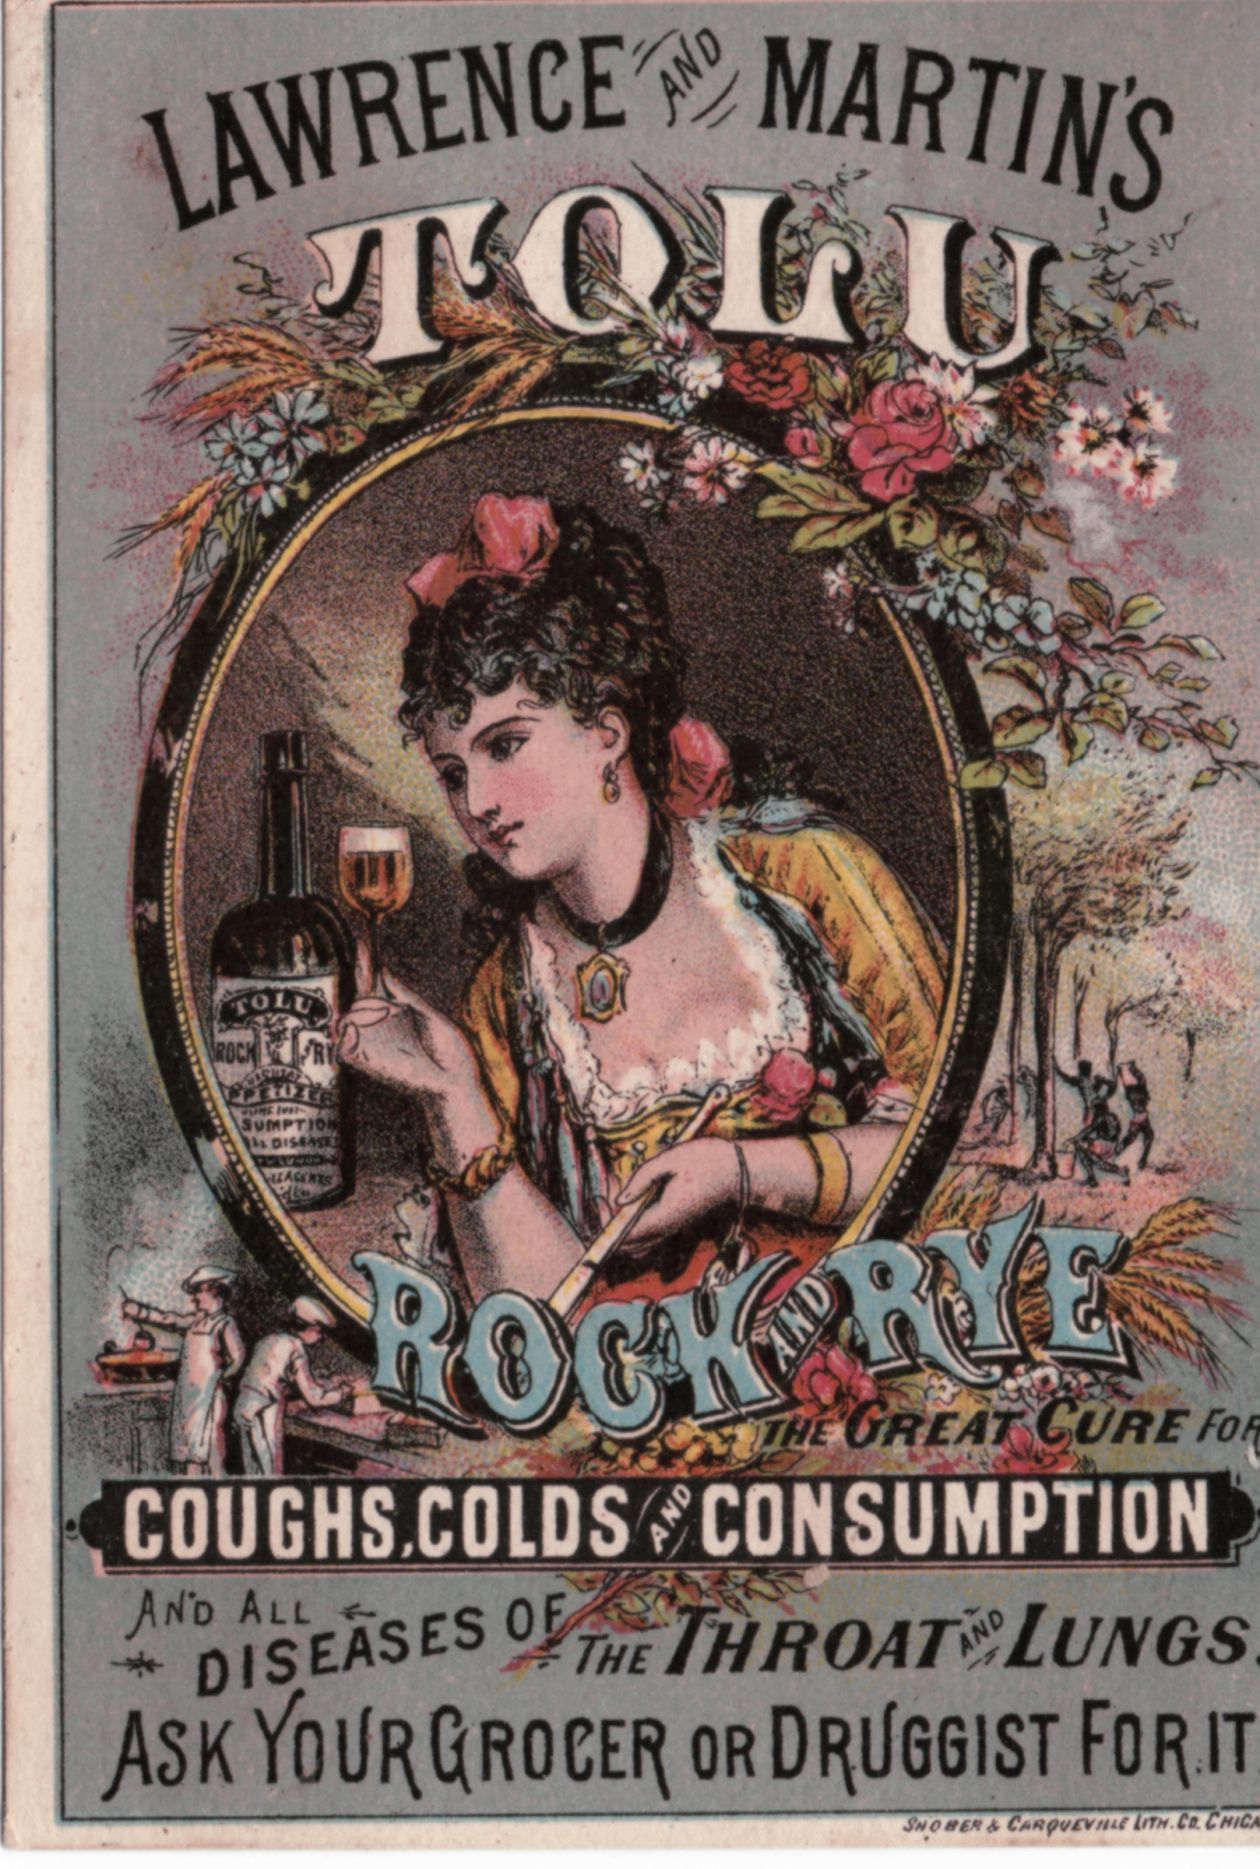 An image of an advertisement from the late 19th century for Lawrence & Martin's Tolu Rock and Rye as a cure for illnesses and diseases